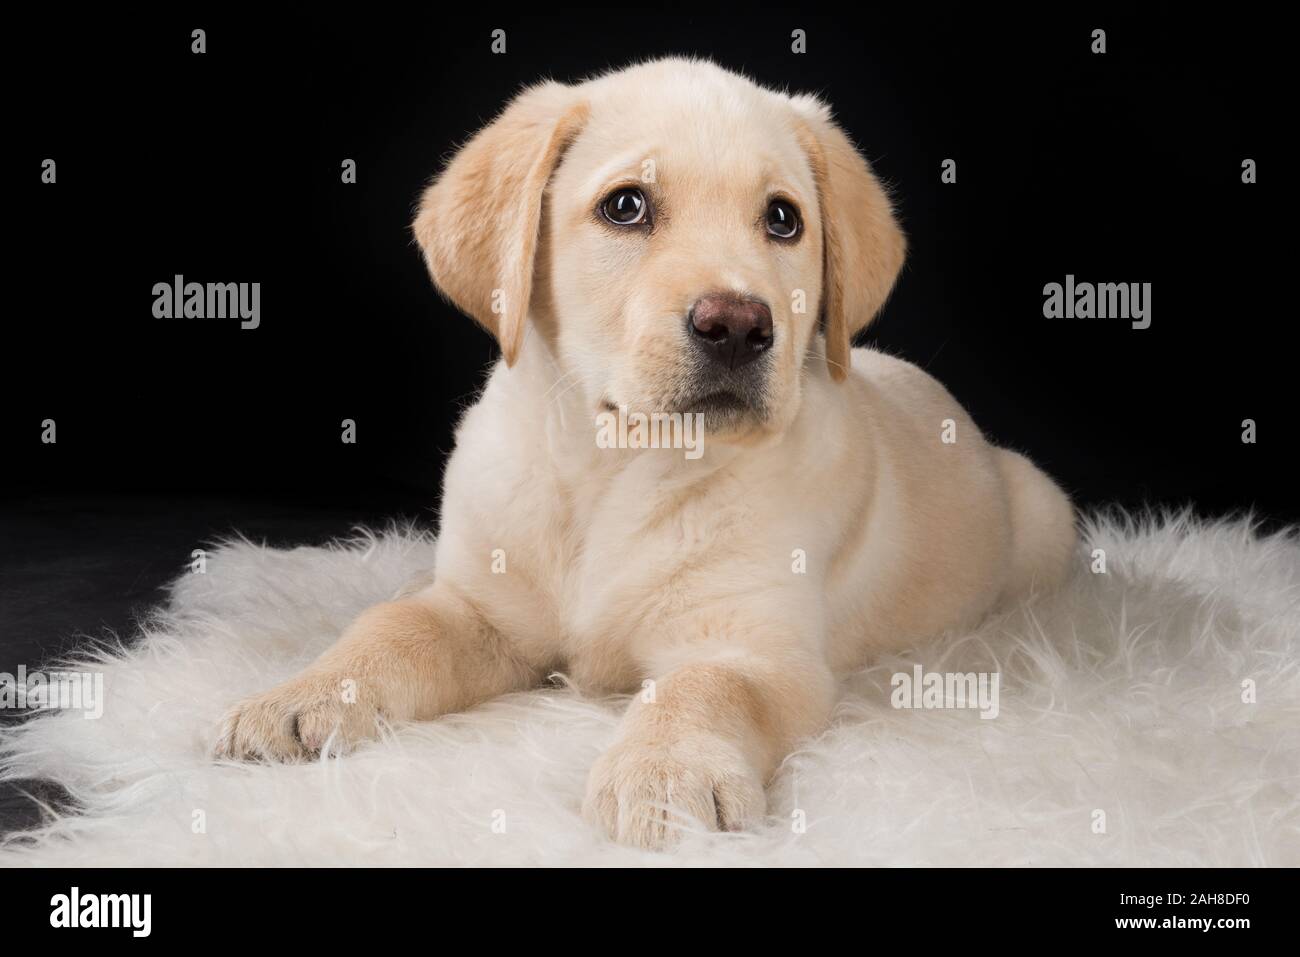 Close up studio portrait of a young Labrador dog sitting on a carpet against a black background Stock Photo